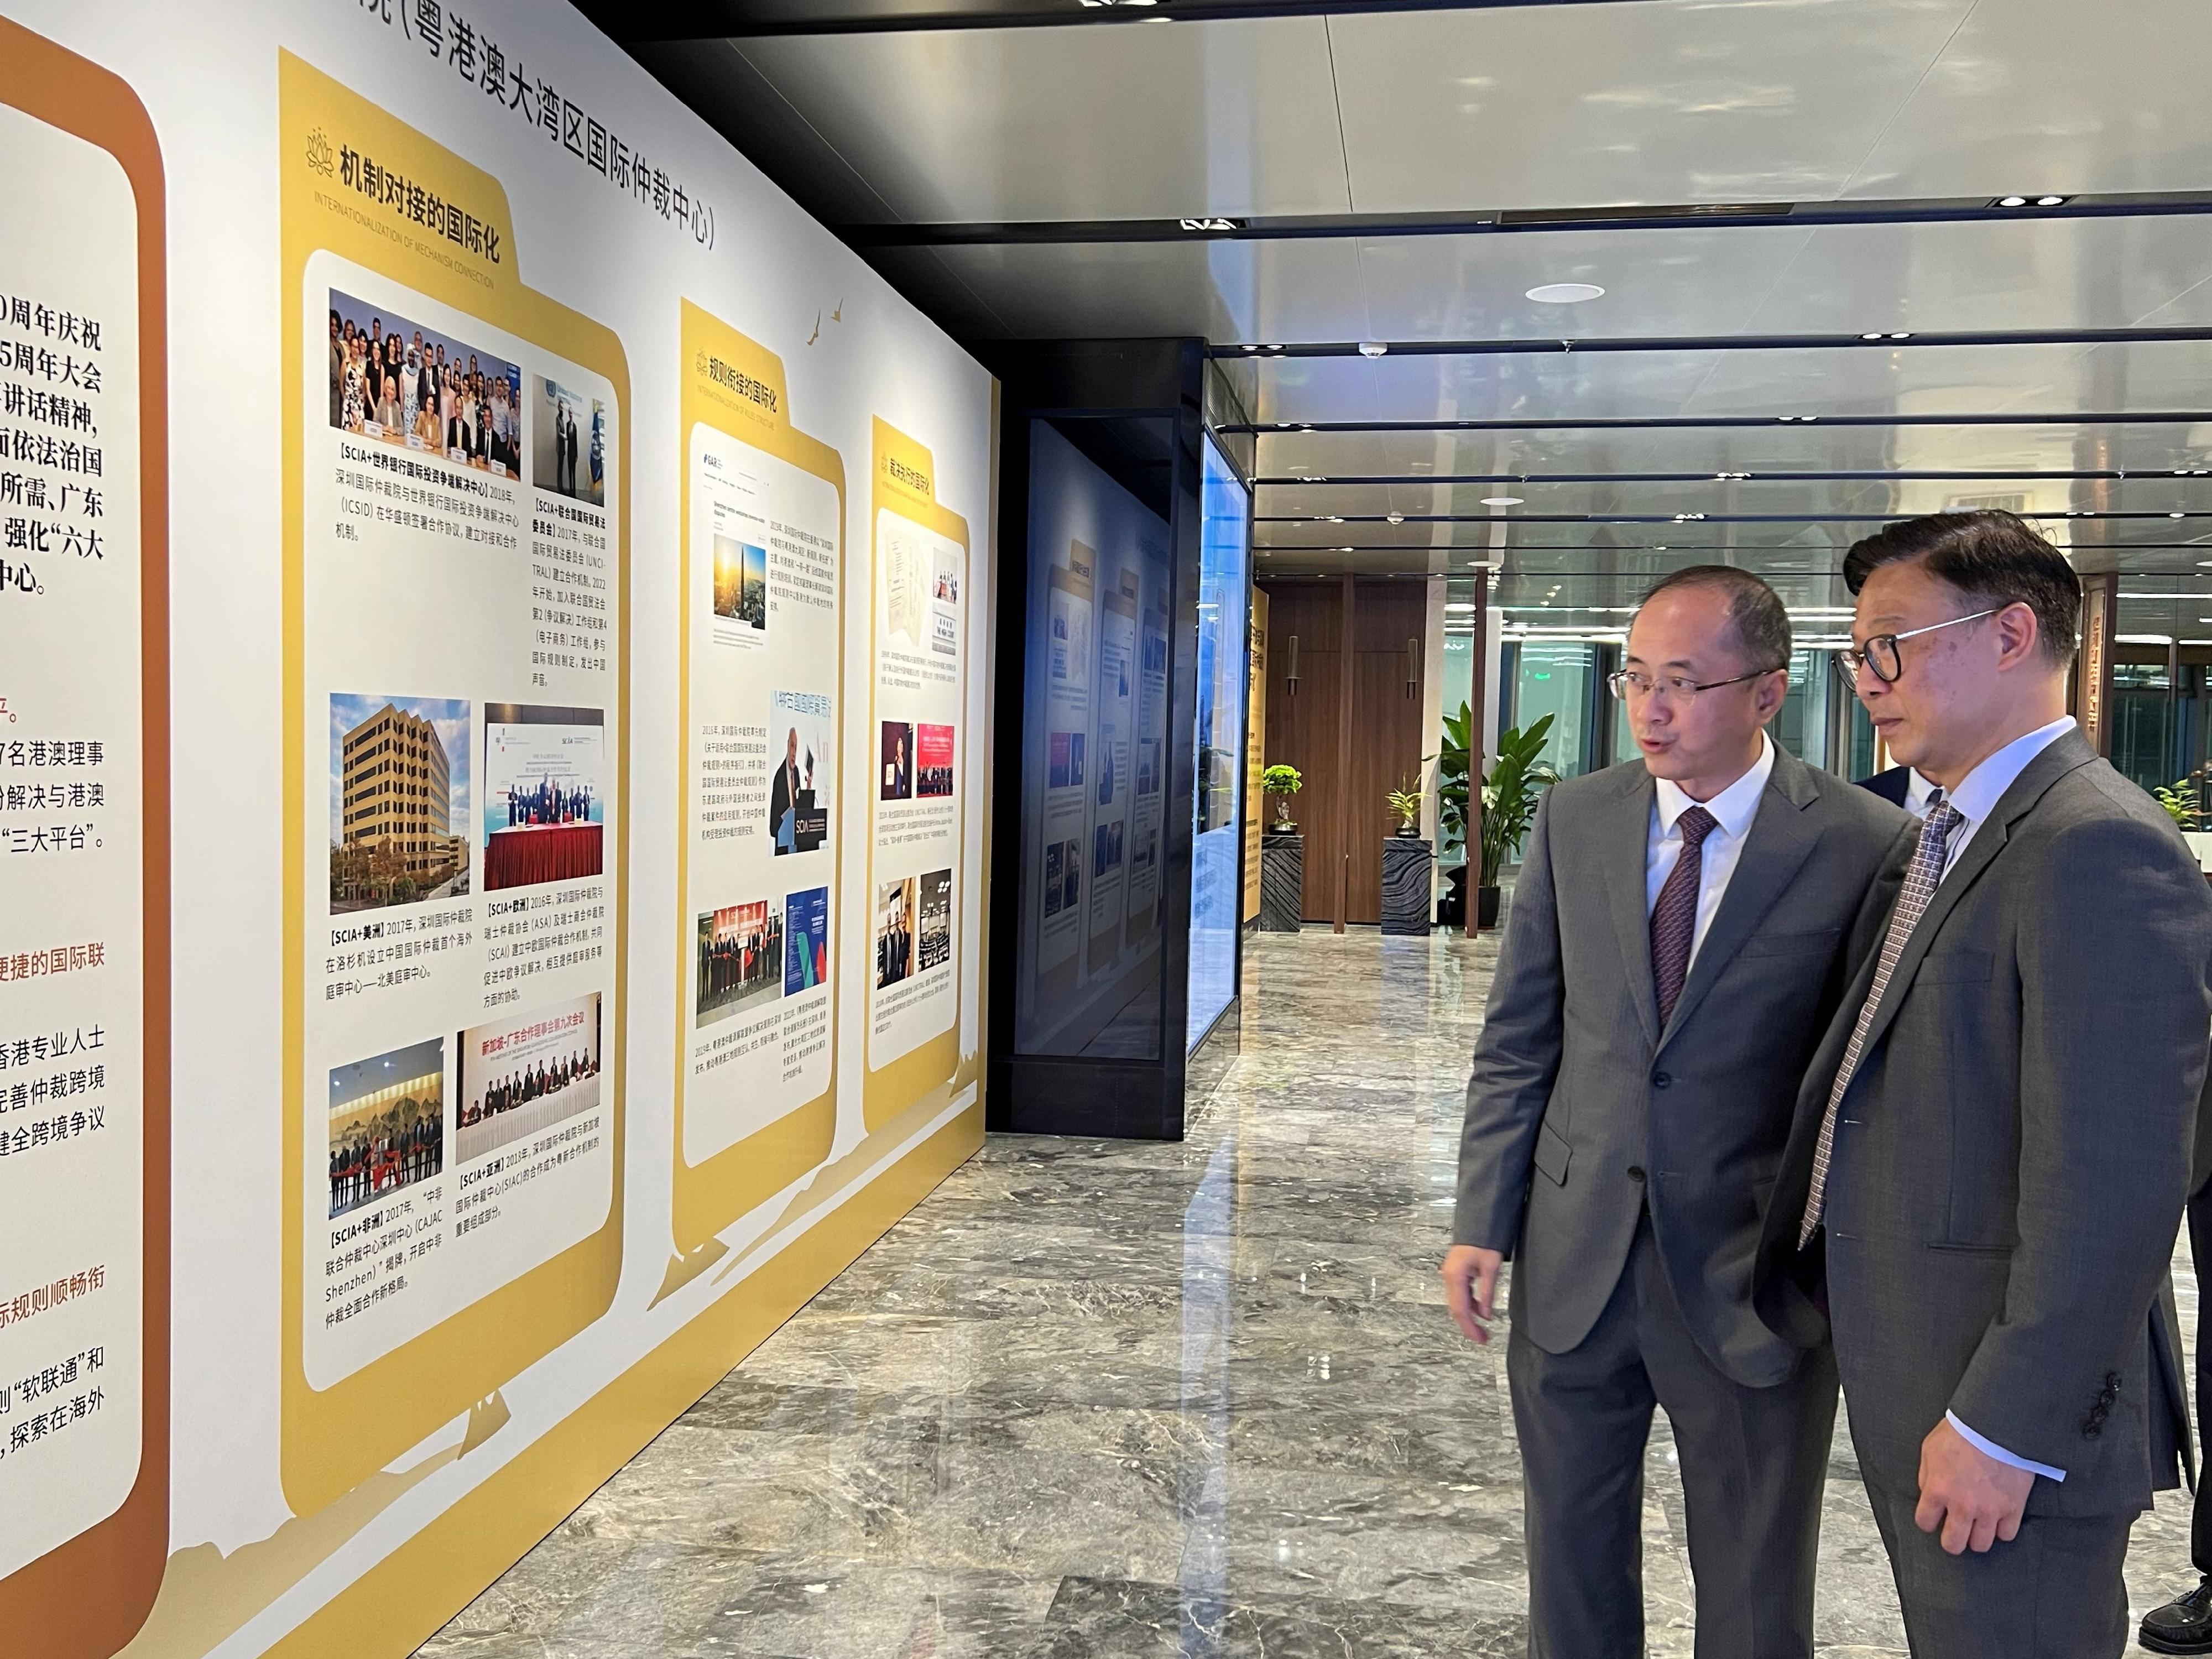 The Deputy Secretary for Justice, Mr Cheung Kwok-kwan (right), visited the Shenzhen Court of International Arbitration (SCIA) in Shenzhen today (April 19), and was briefed by its President, Mr Liu Xiaochun (left), on the operation of SCIA.